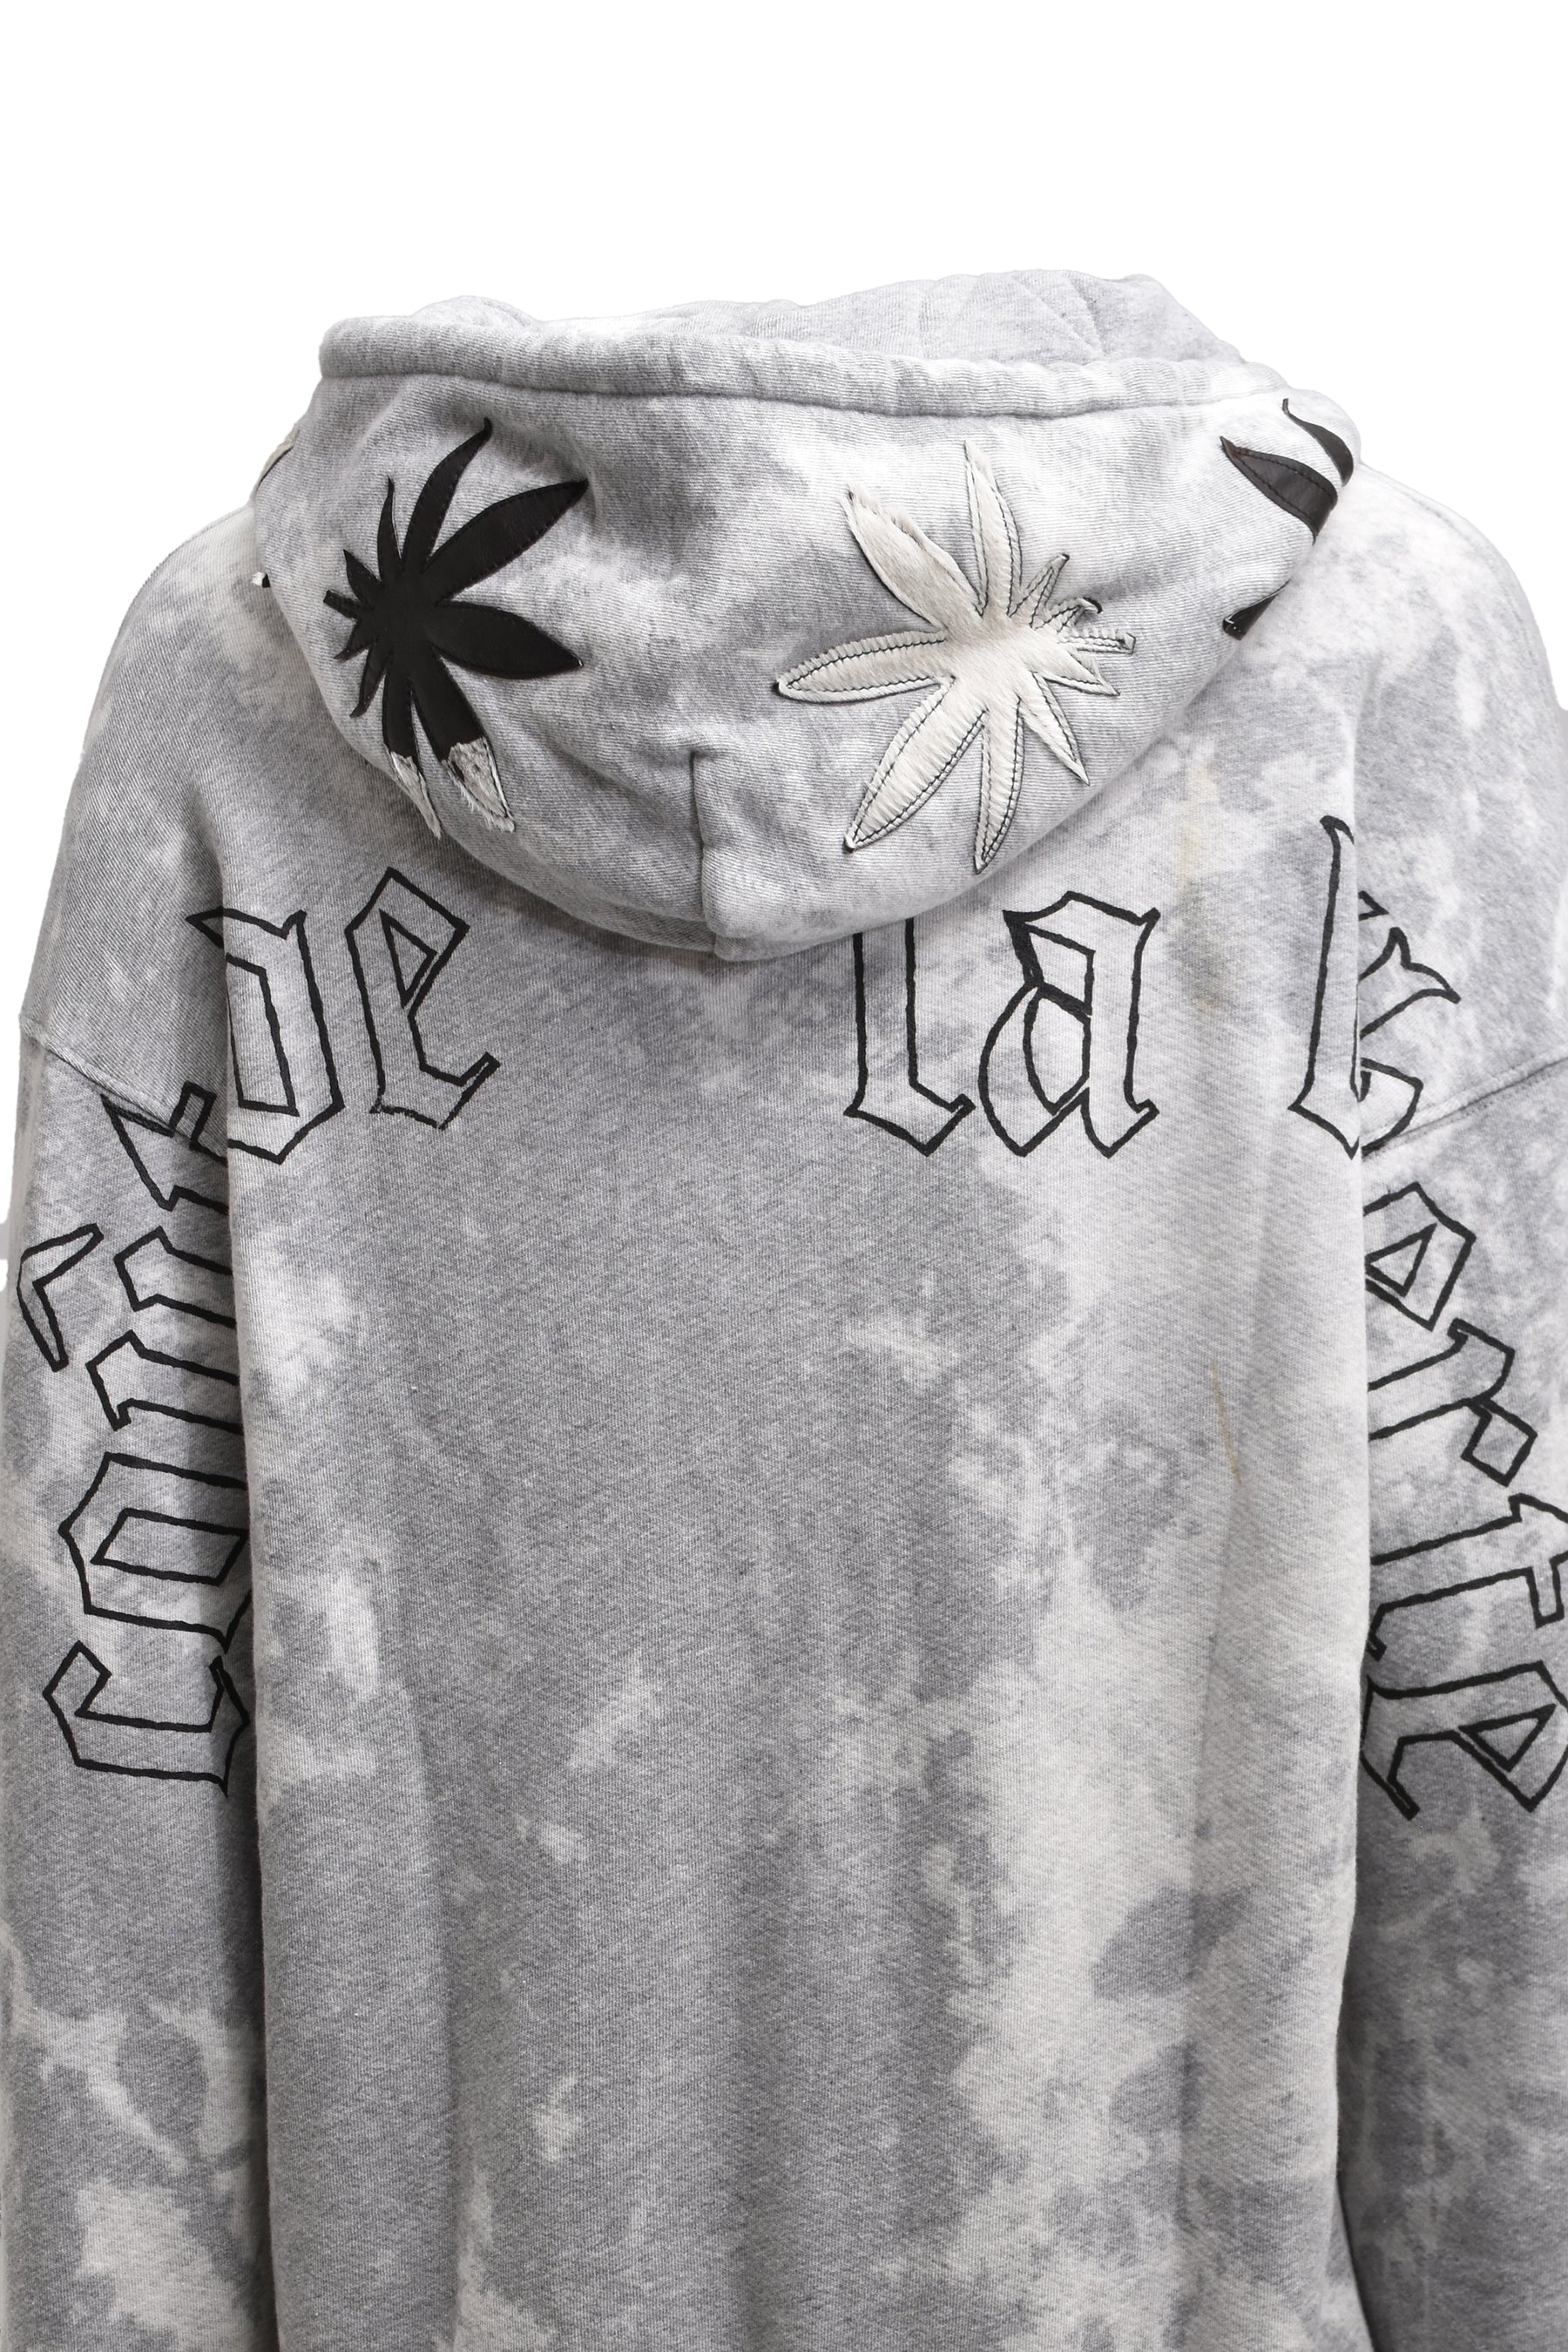 ARIANA/EMBELLISHED FRENCH TERRY PULLOVER HOODIE / HGRY/WHT